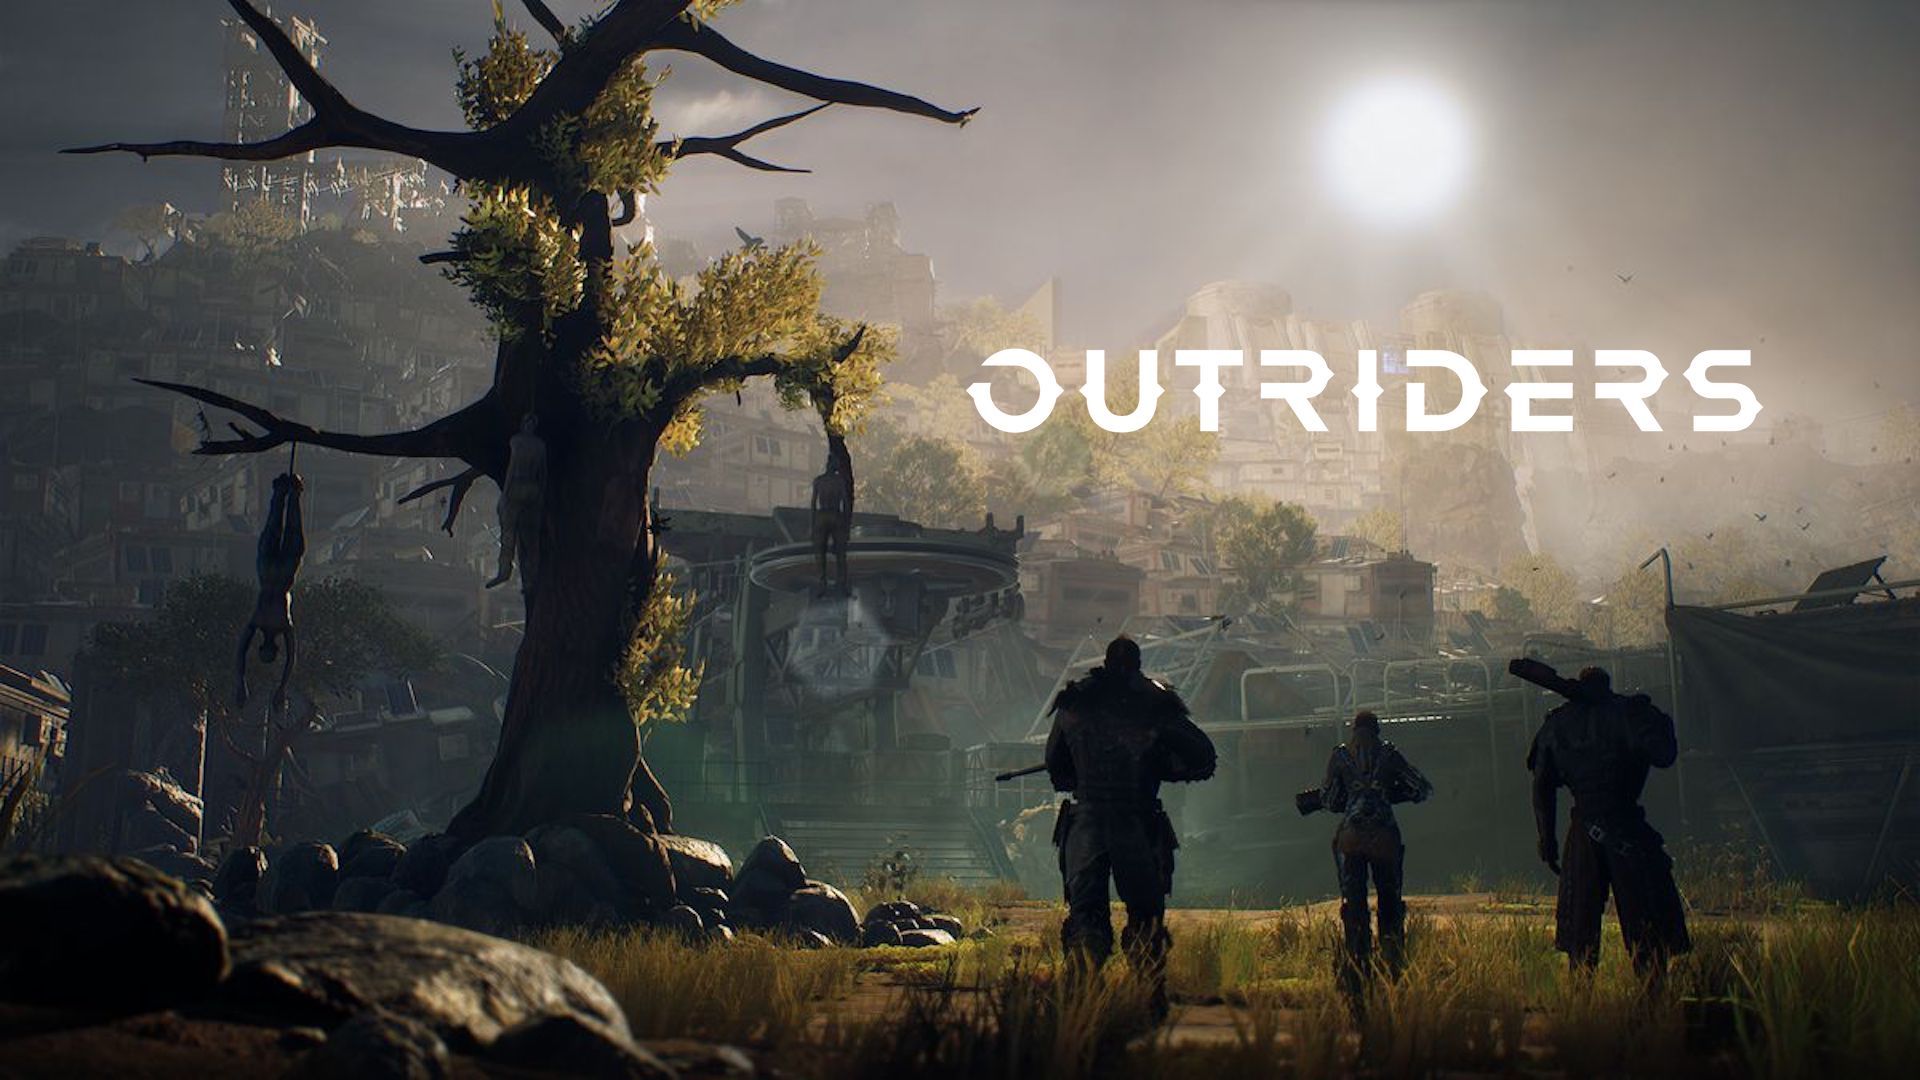 Outriders Wallpaper.jpg